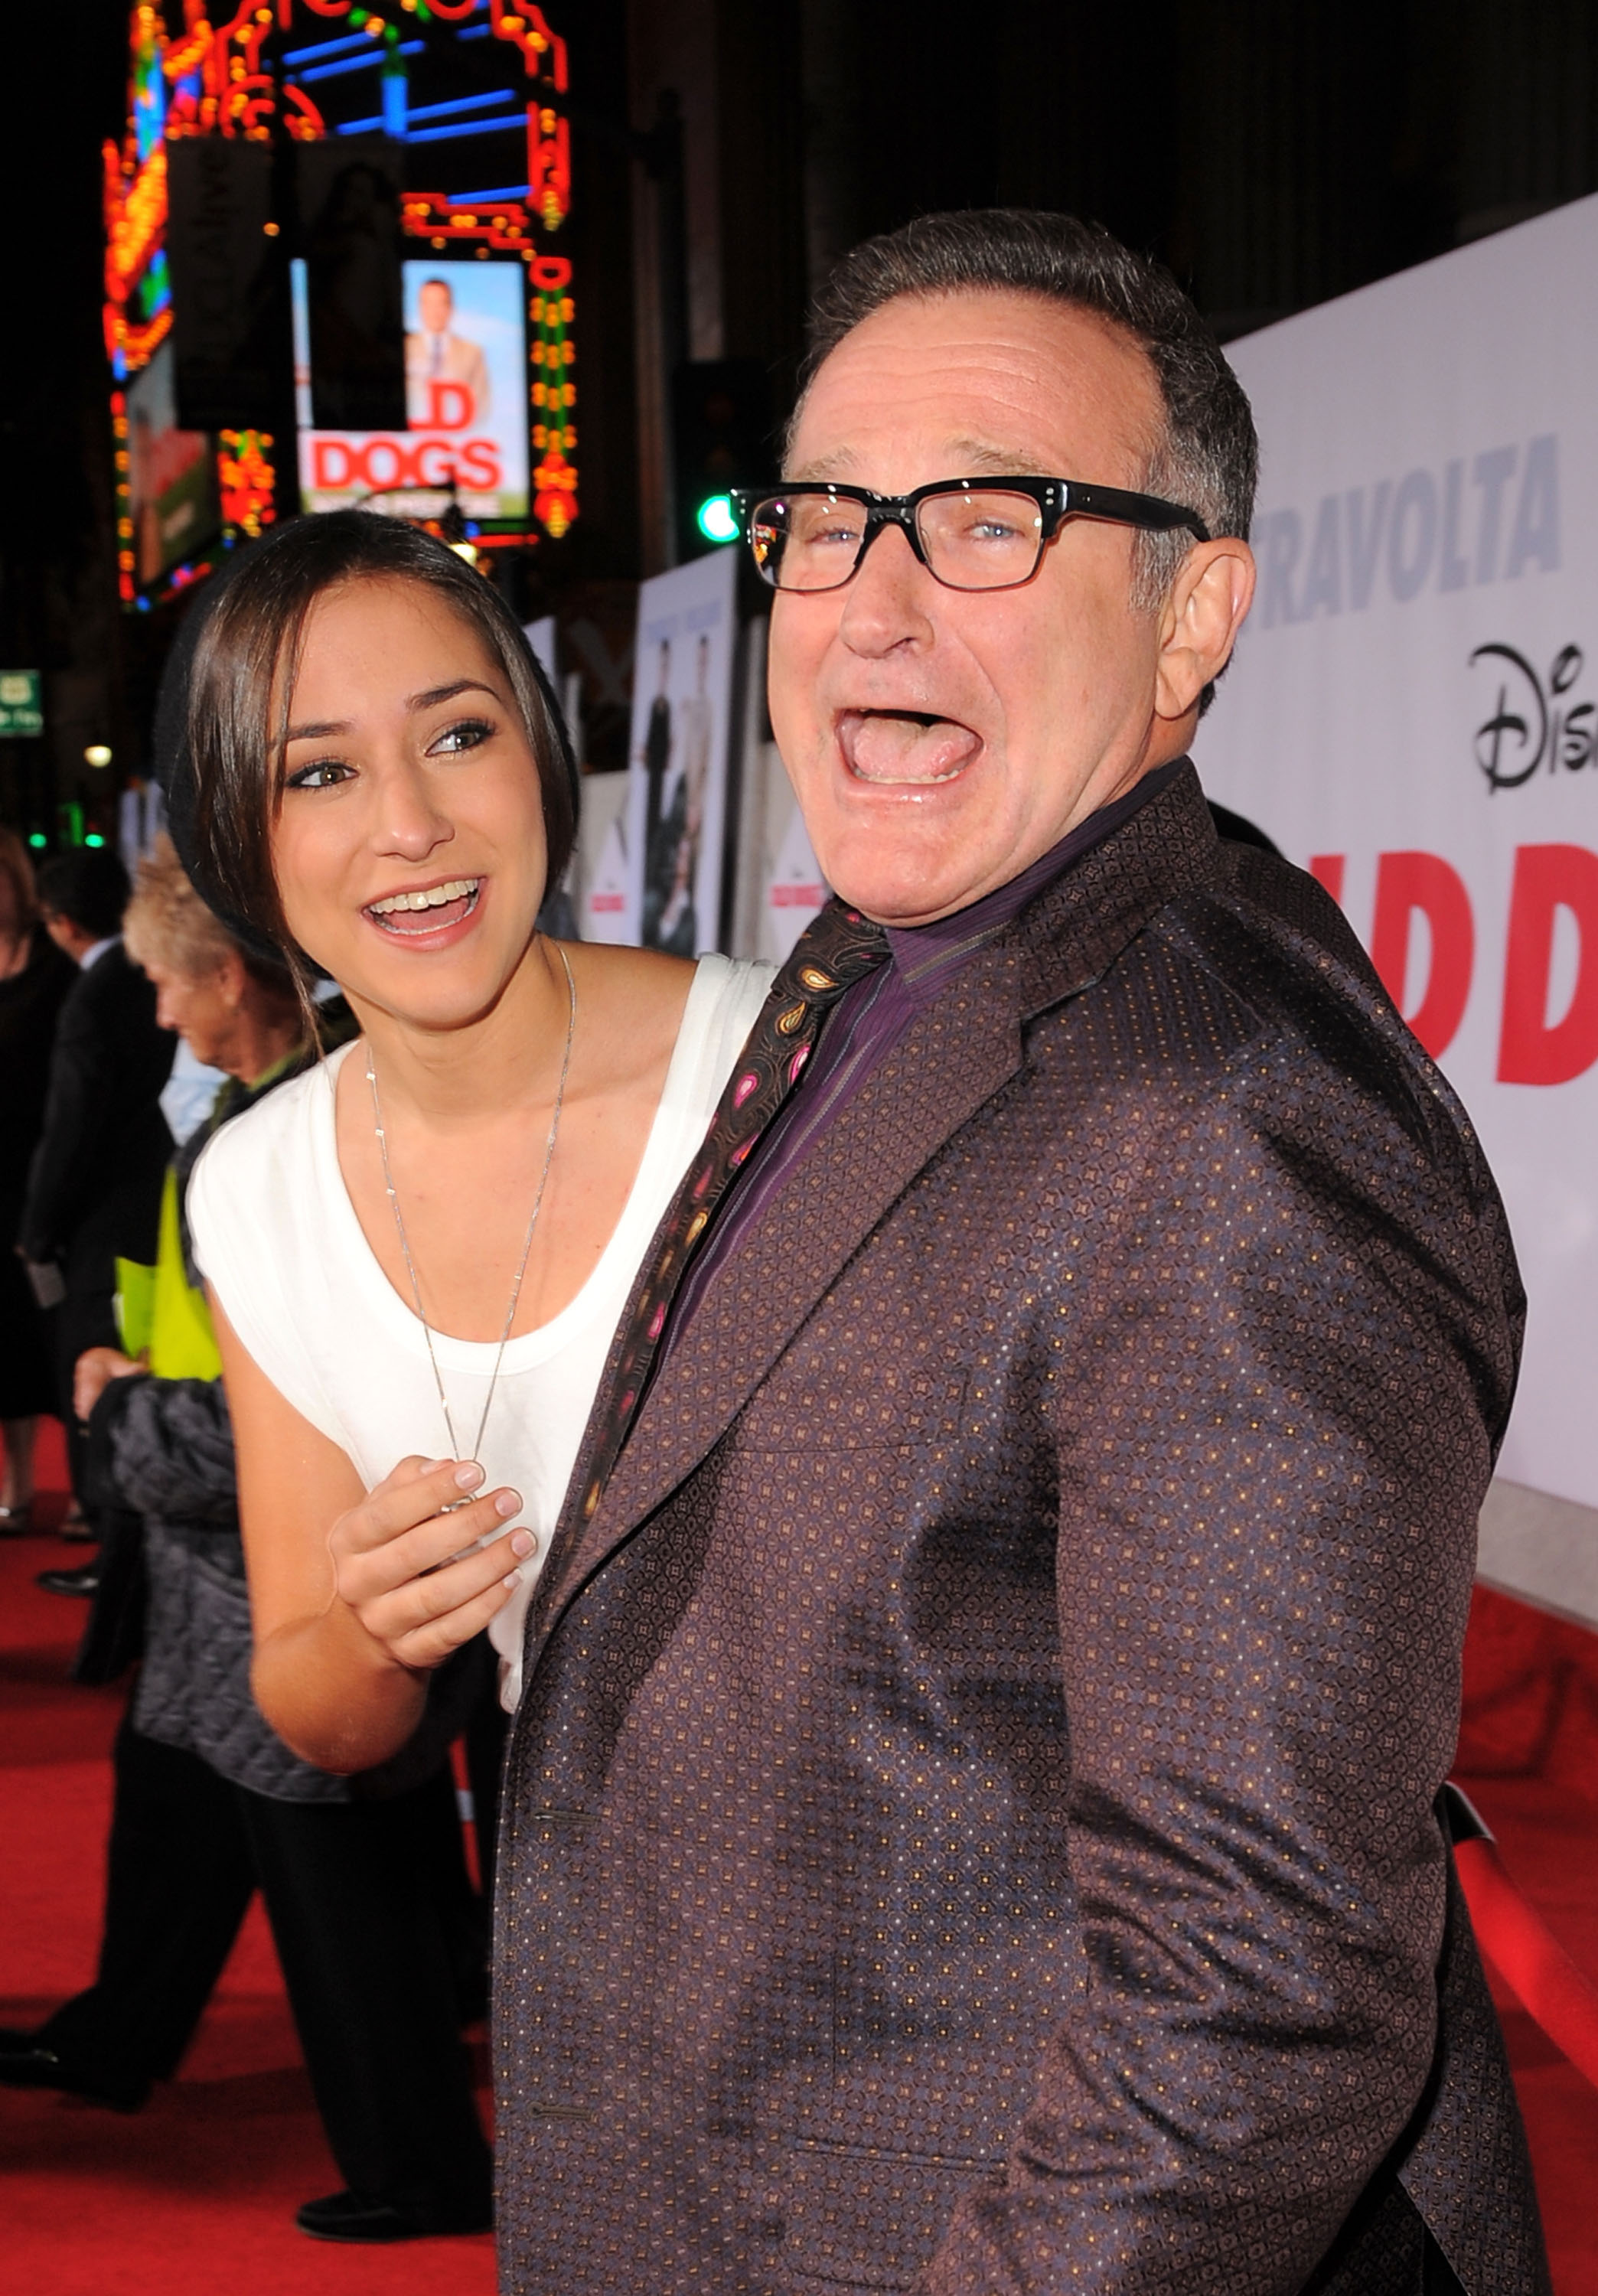 Zelda Williams (L) and Robin Williams arrive at the premiere of Walt Disney Pictures' "Old Dogs" held at the El Capitan Theatre on November 9, 2009 in Hollywood, California | Source: Getty Images